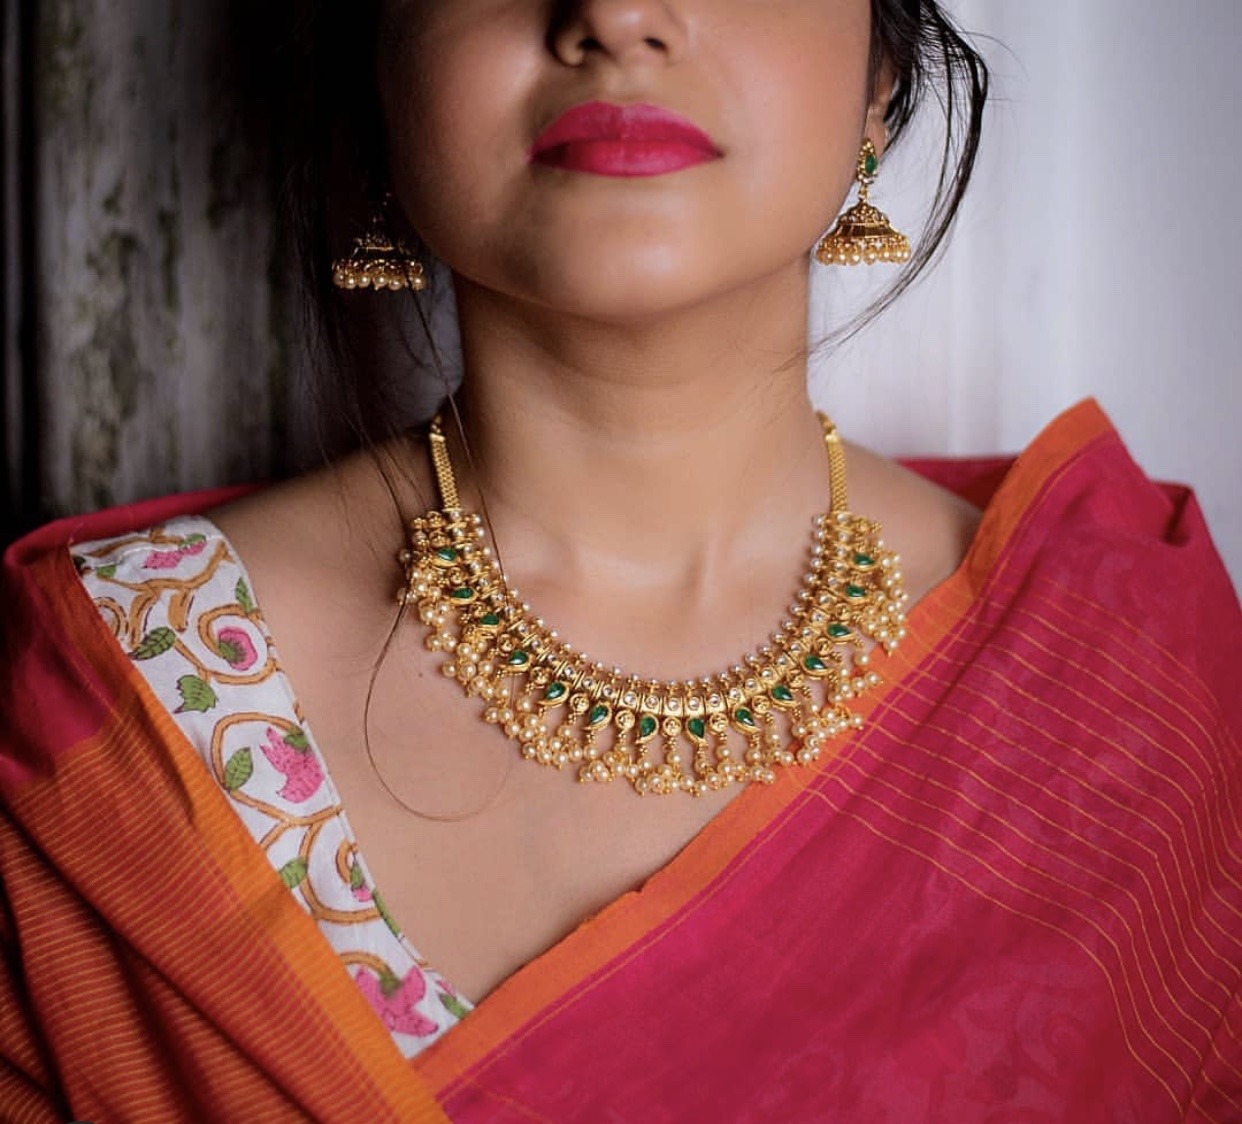 Gold Necklace Set with Jhumka Earring